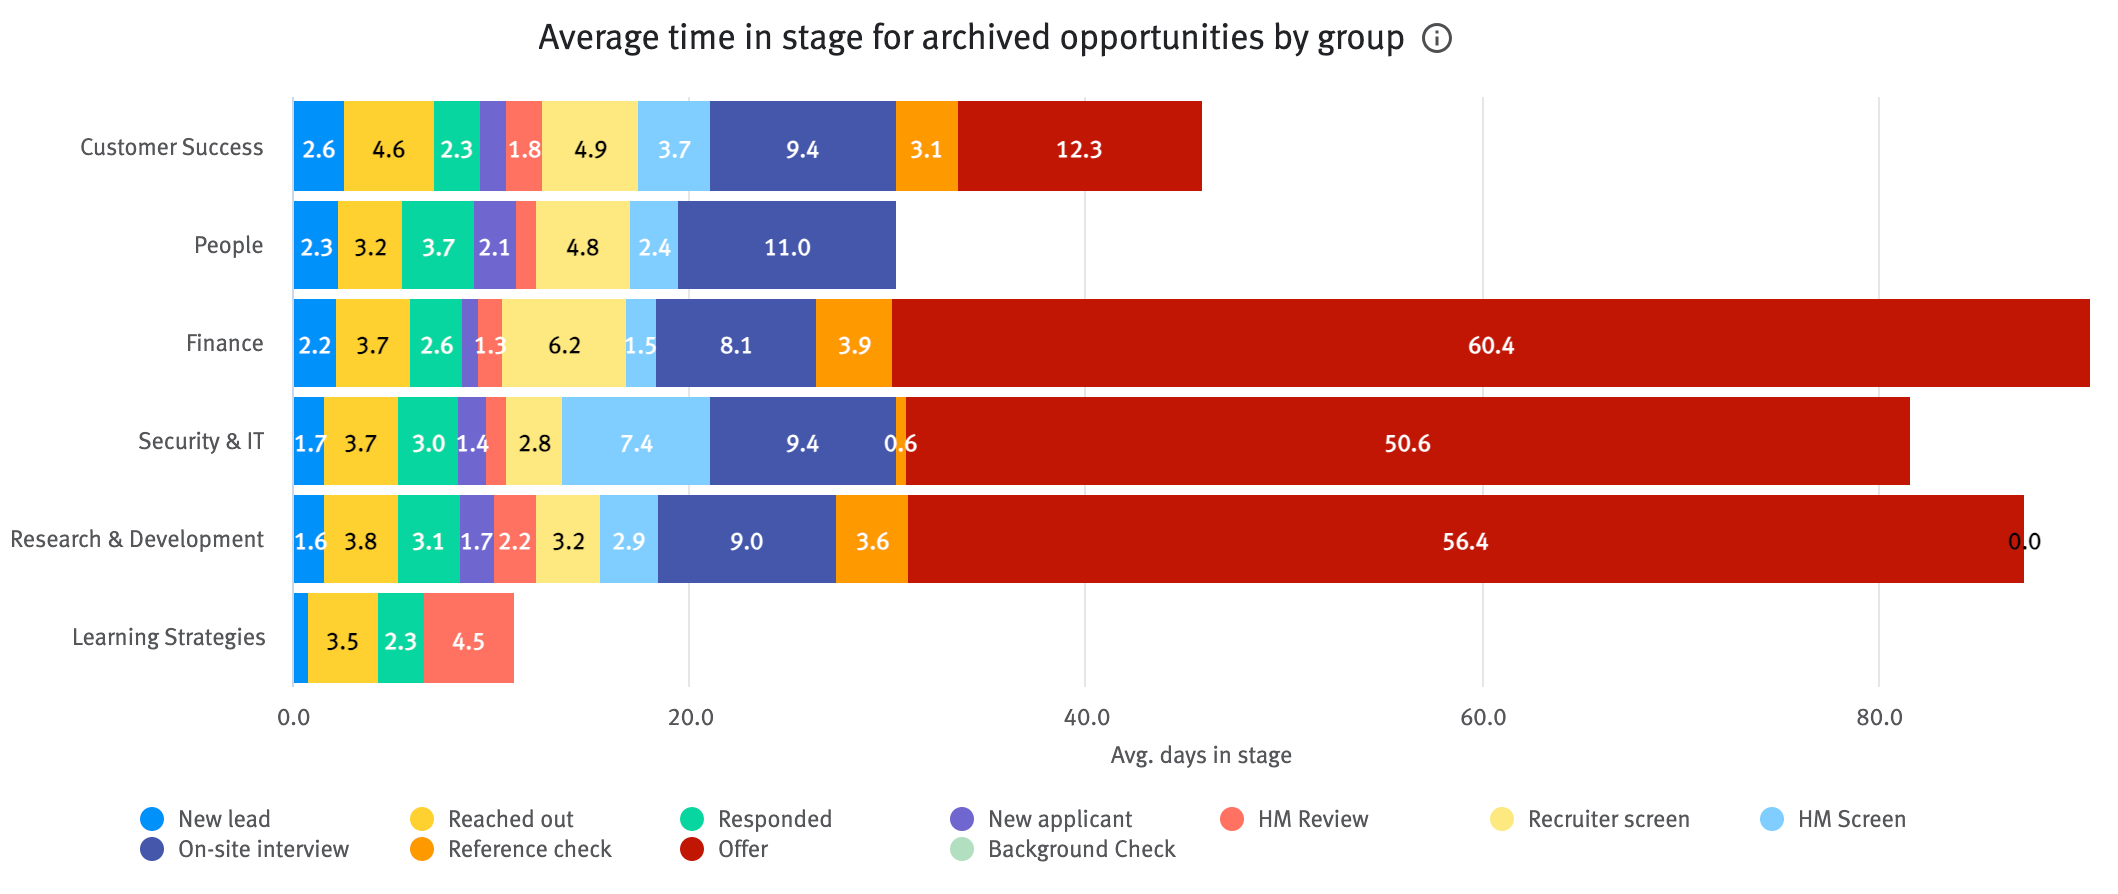 Average time in stage for archived opportunities by group chart